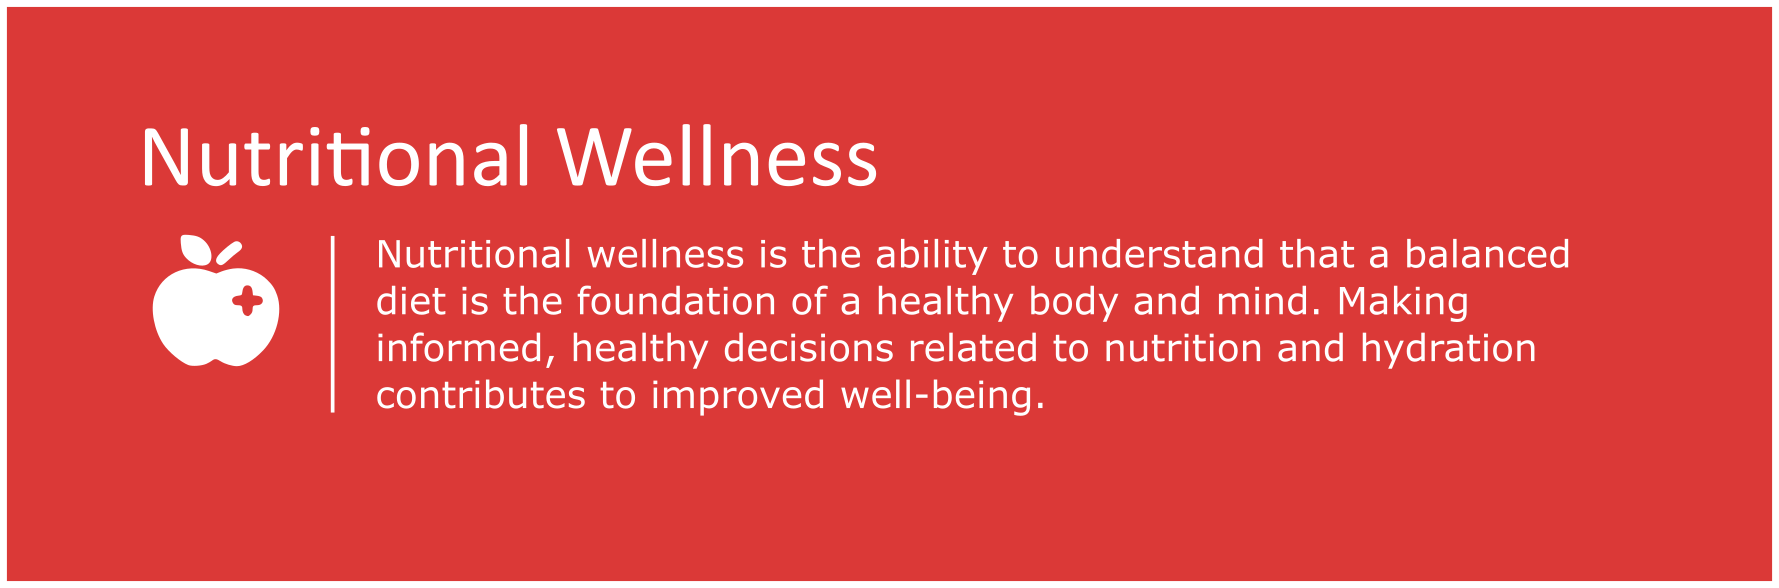 Ability to understand that a balanced diet is the foundation of a healthy body and mind. Making informed, healthy decisions related to nutrition and hydration contributes to improved well-being.